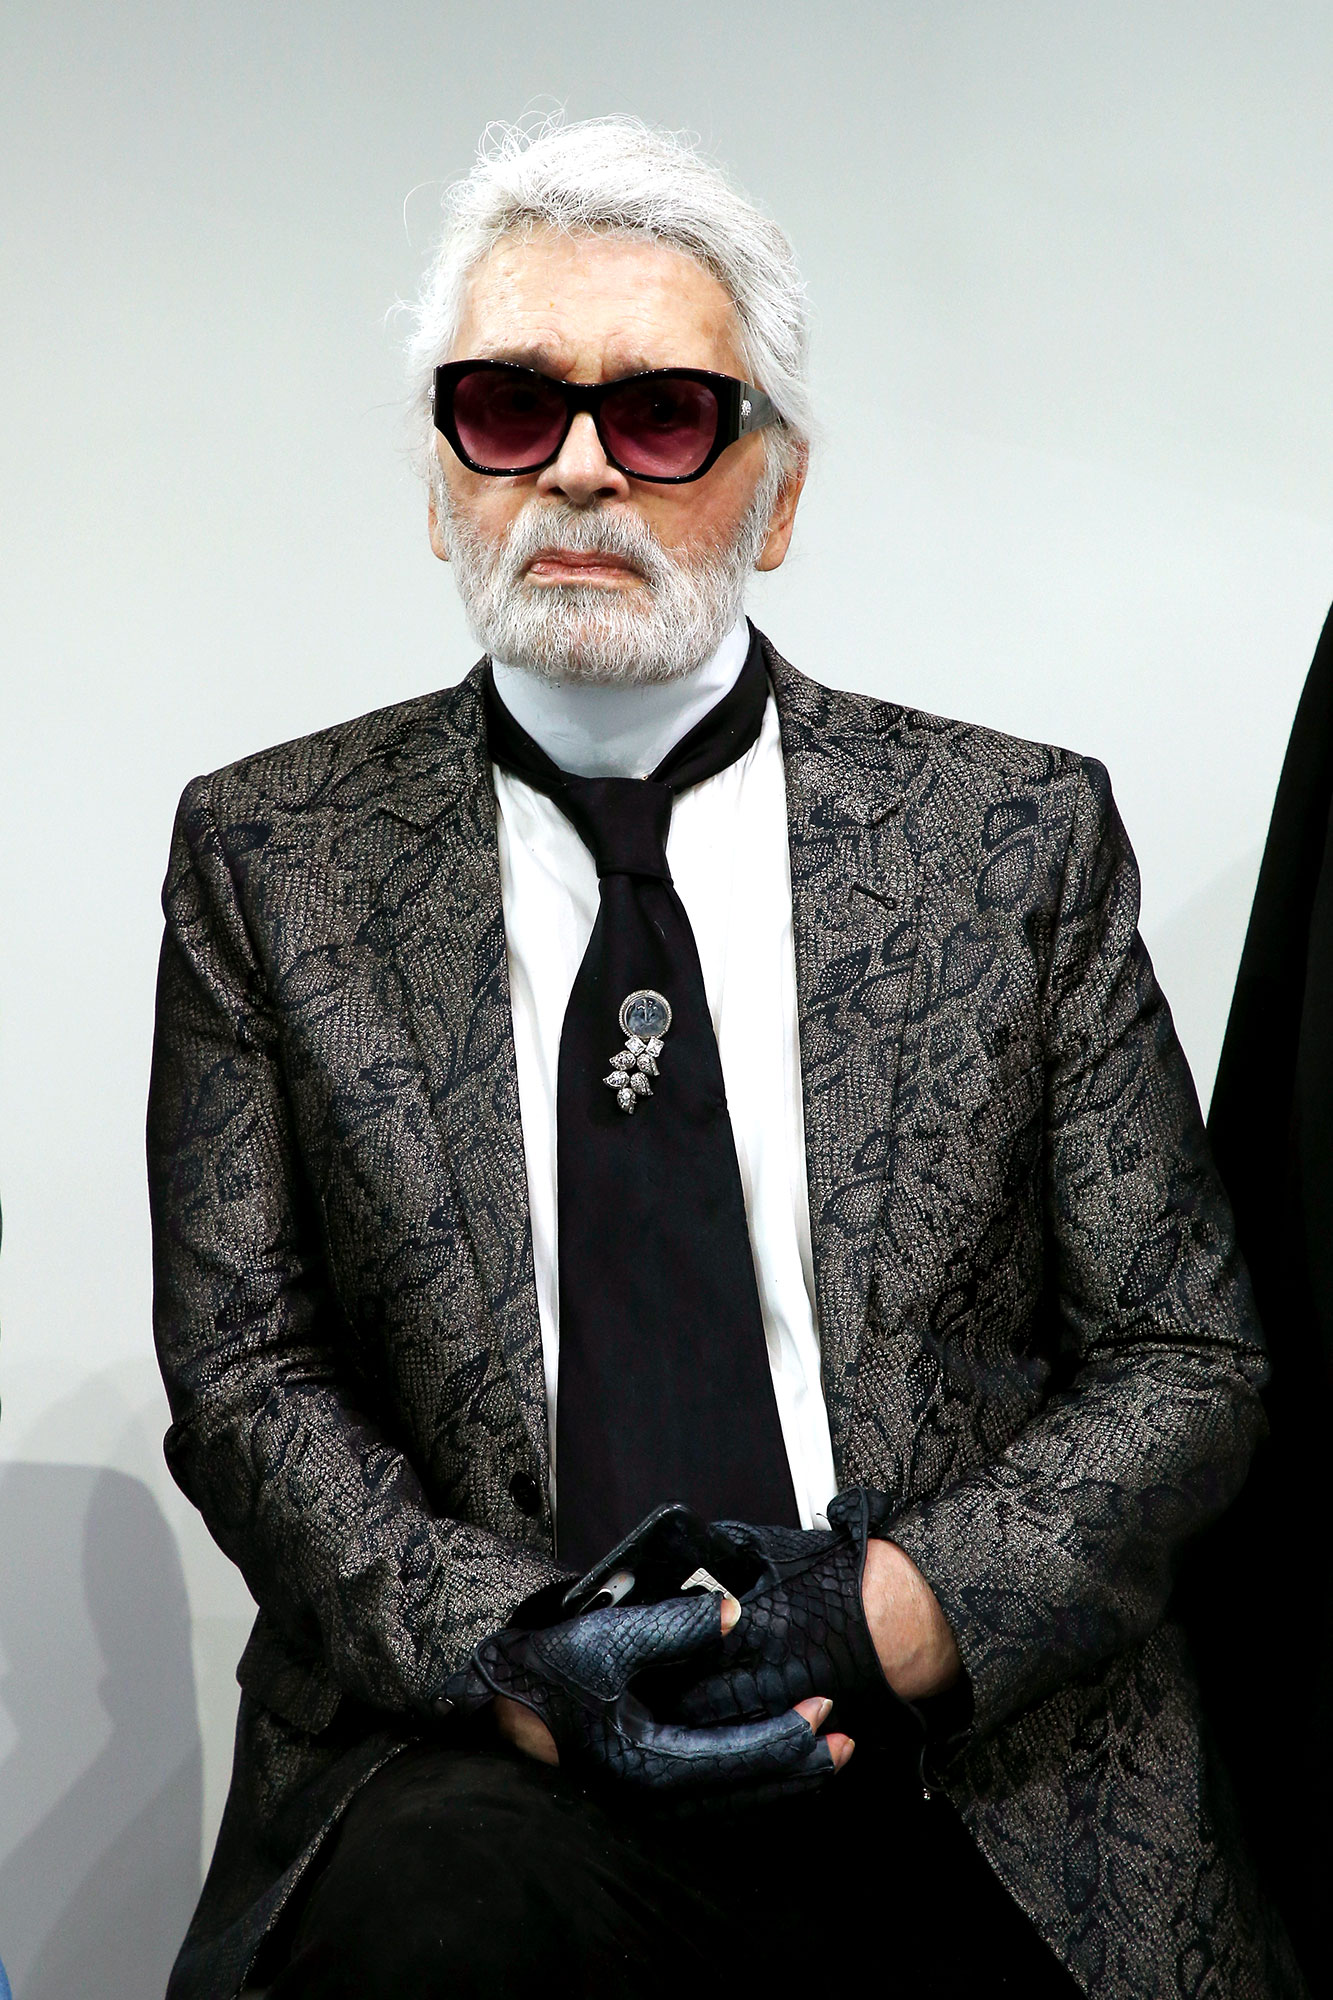 Karl Lagerfeld Dead at 85: Stars Pay Tribute